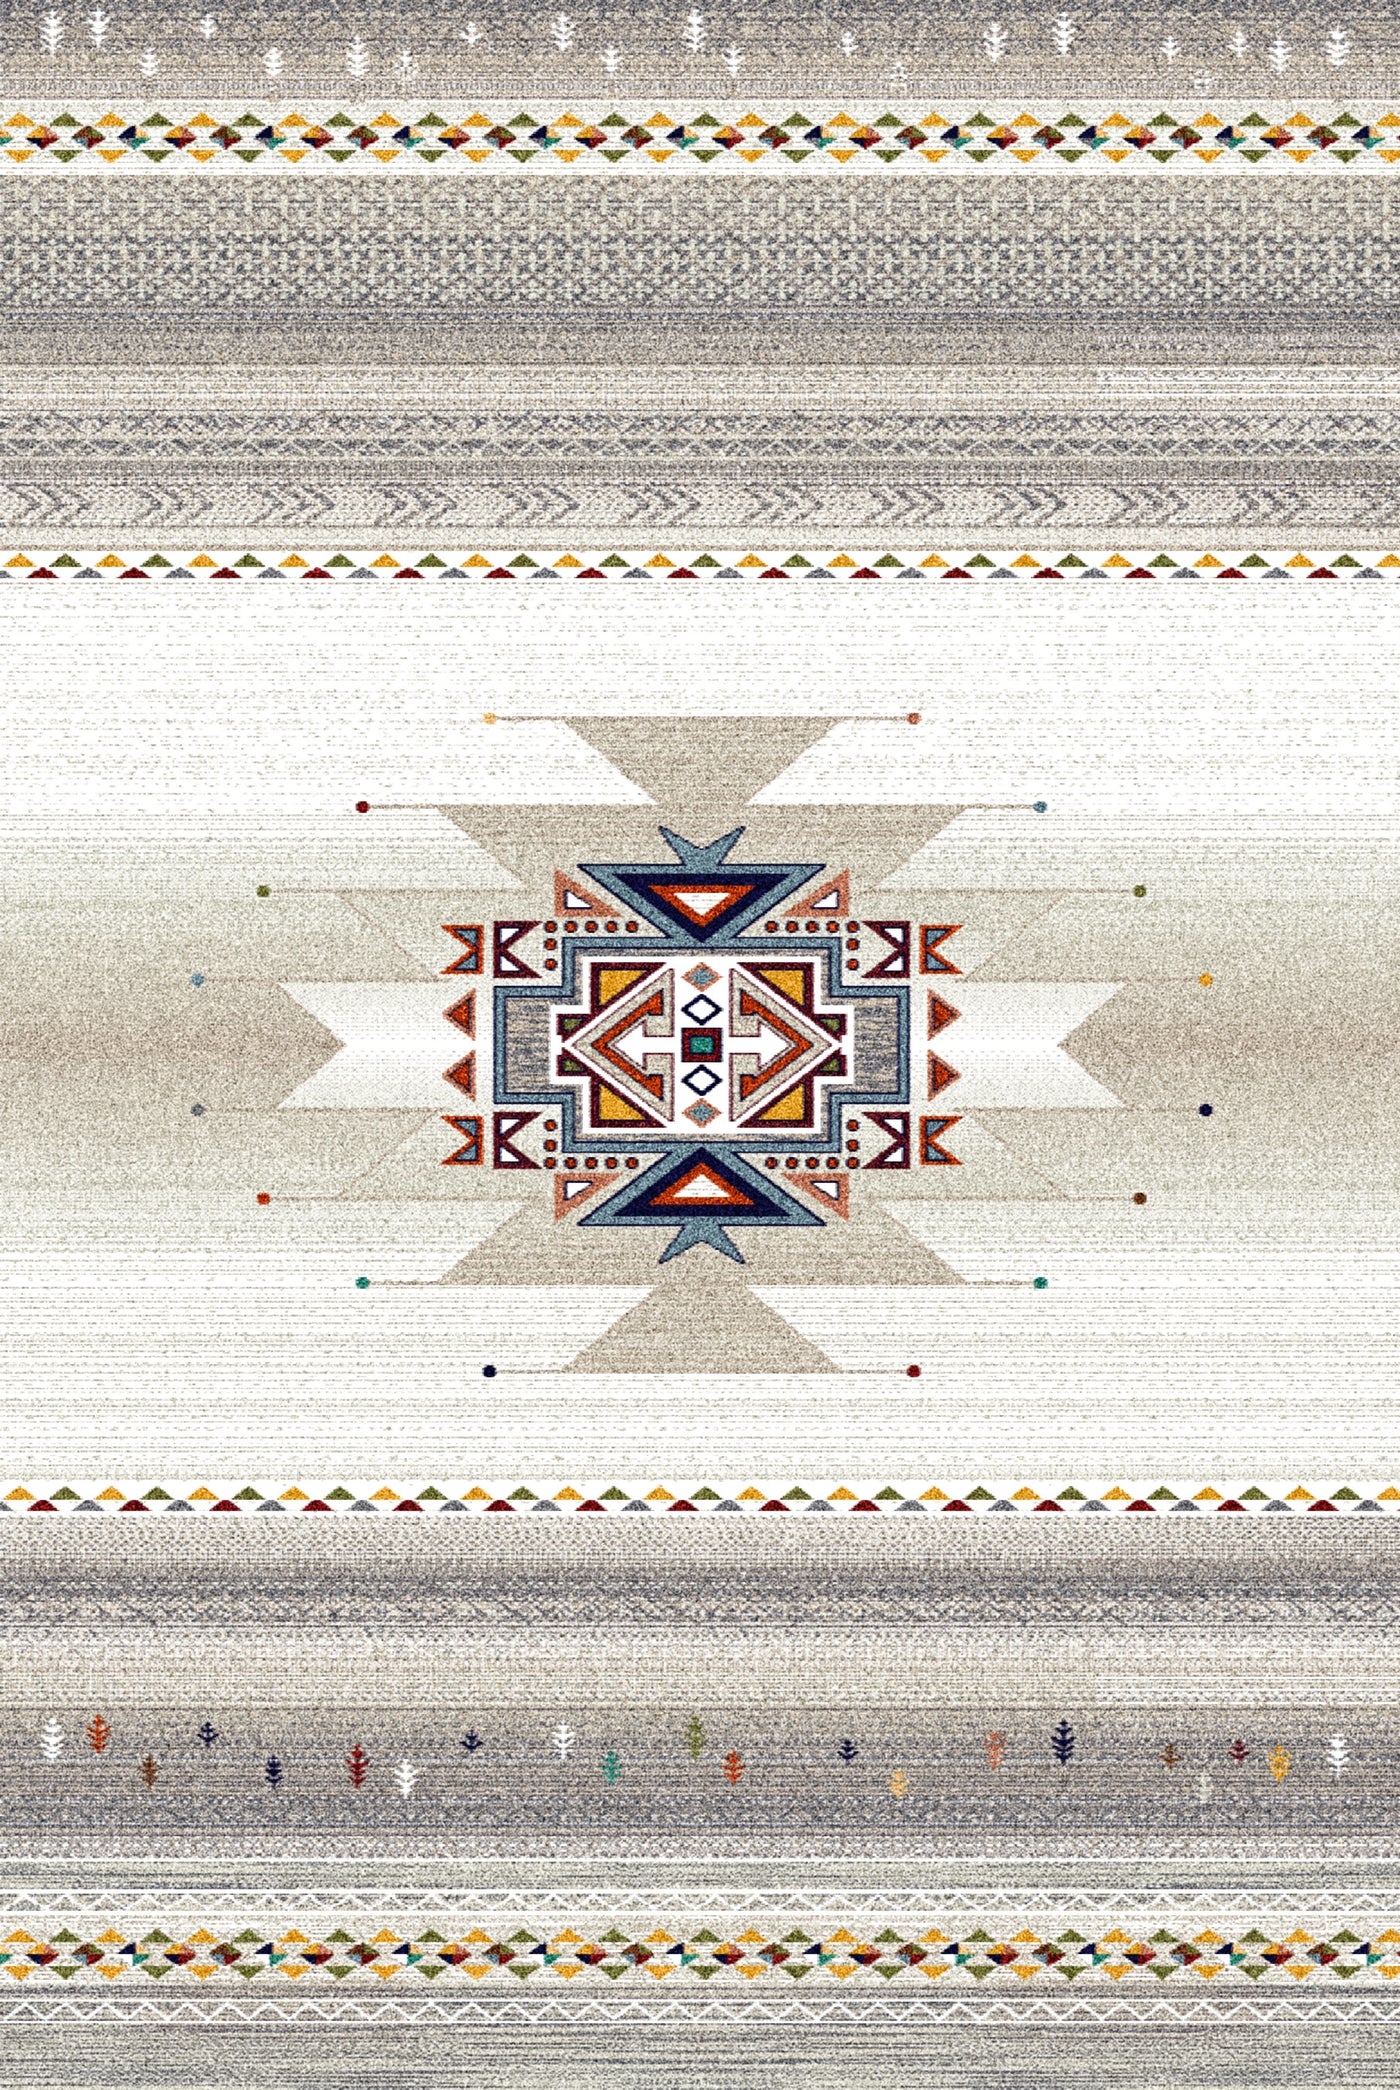 A carpet featuring a central geometric medallion with intricate patterns in shades of blue, red, orange, and beige, set against a gradient background transitioning from light to dark beige with detailed borders.